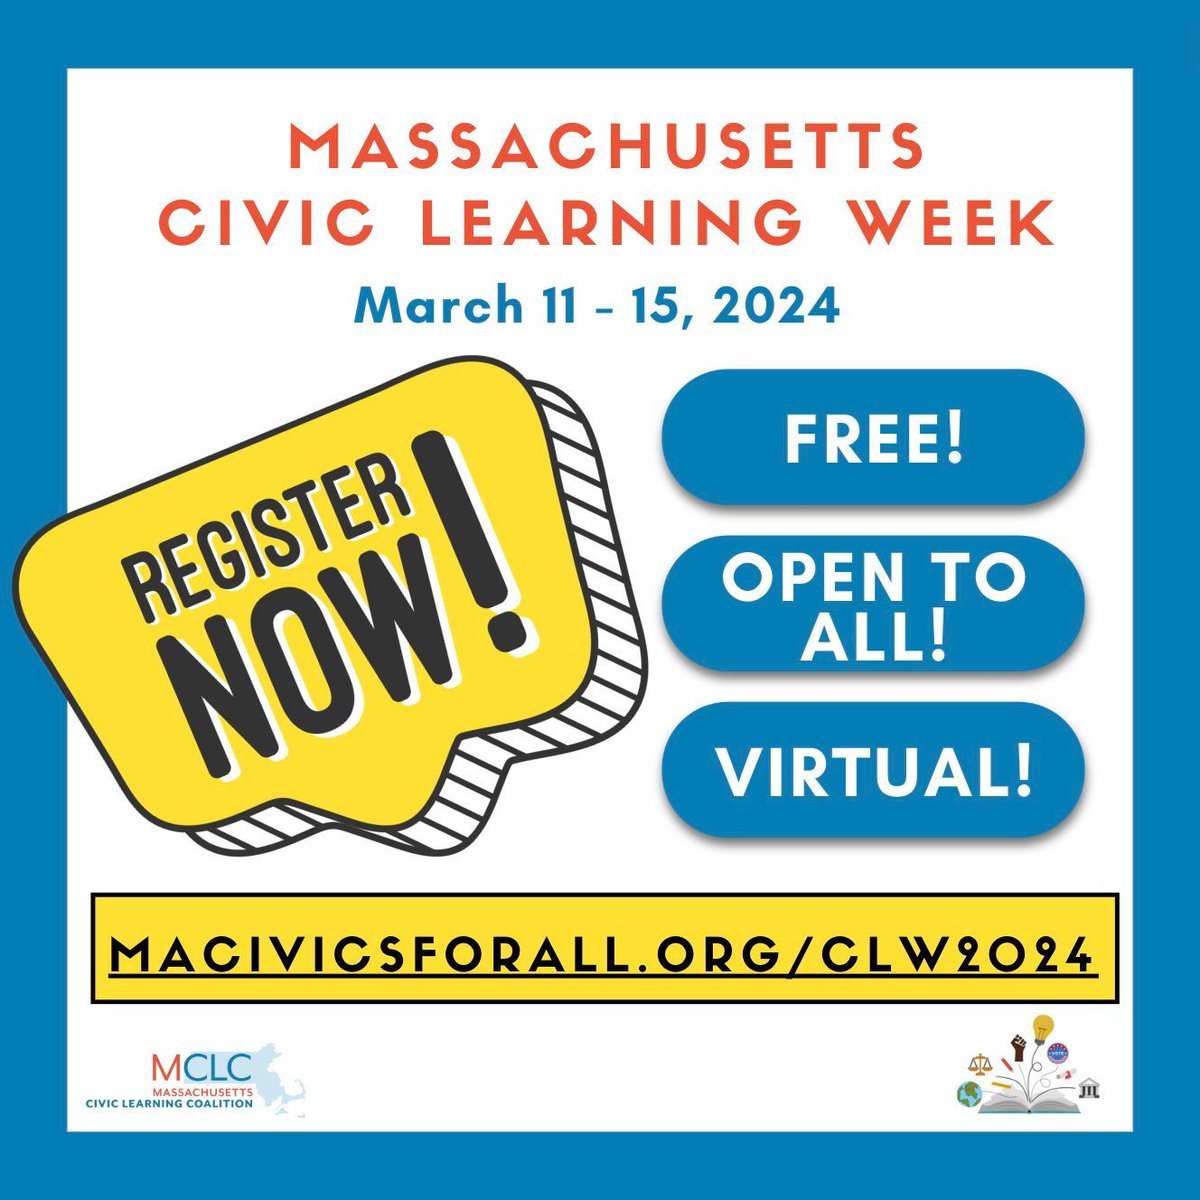 Registration is now LIVE for #MACivicLearning Week! Join us March 11–15 for free online and in-person events highlighting civic learning as a nationwide priority for sustaining and strengthening our constitutional democracy. #civiclearningweek @NationalCLW buff.ly/49aF8O6